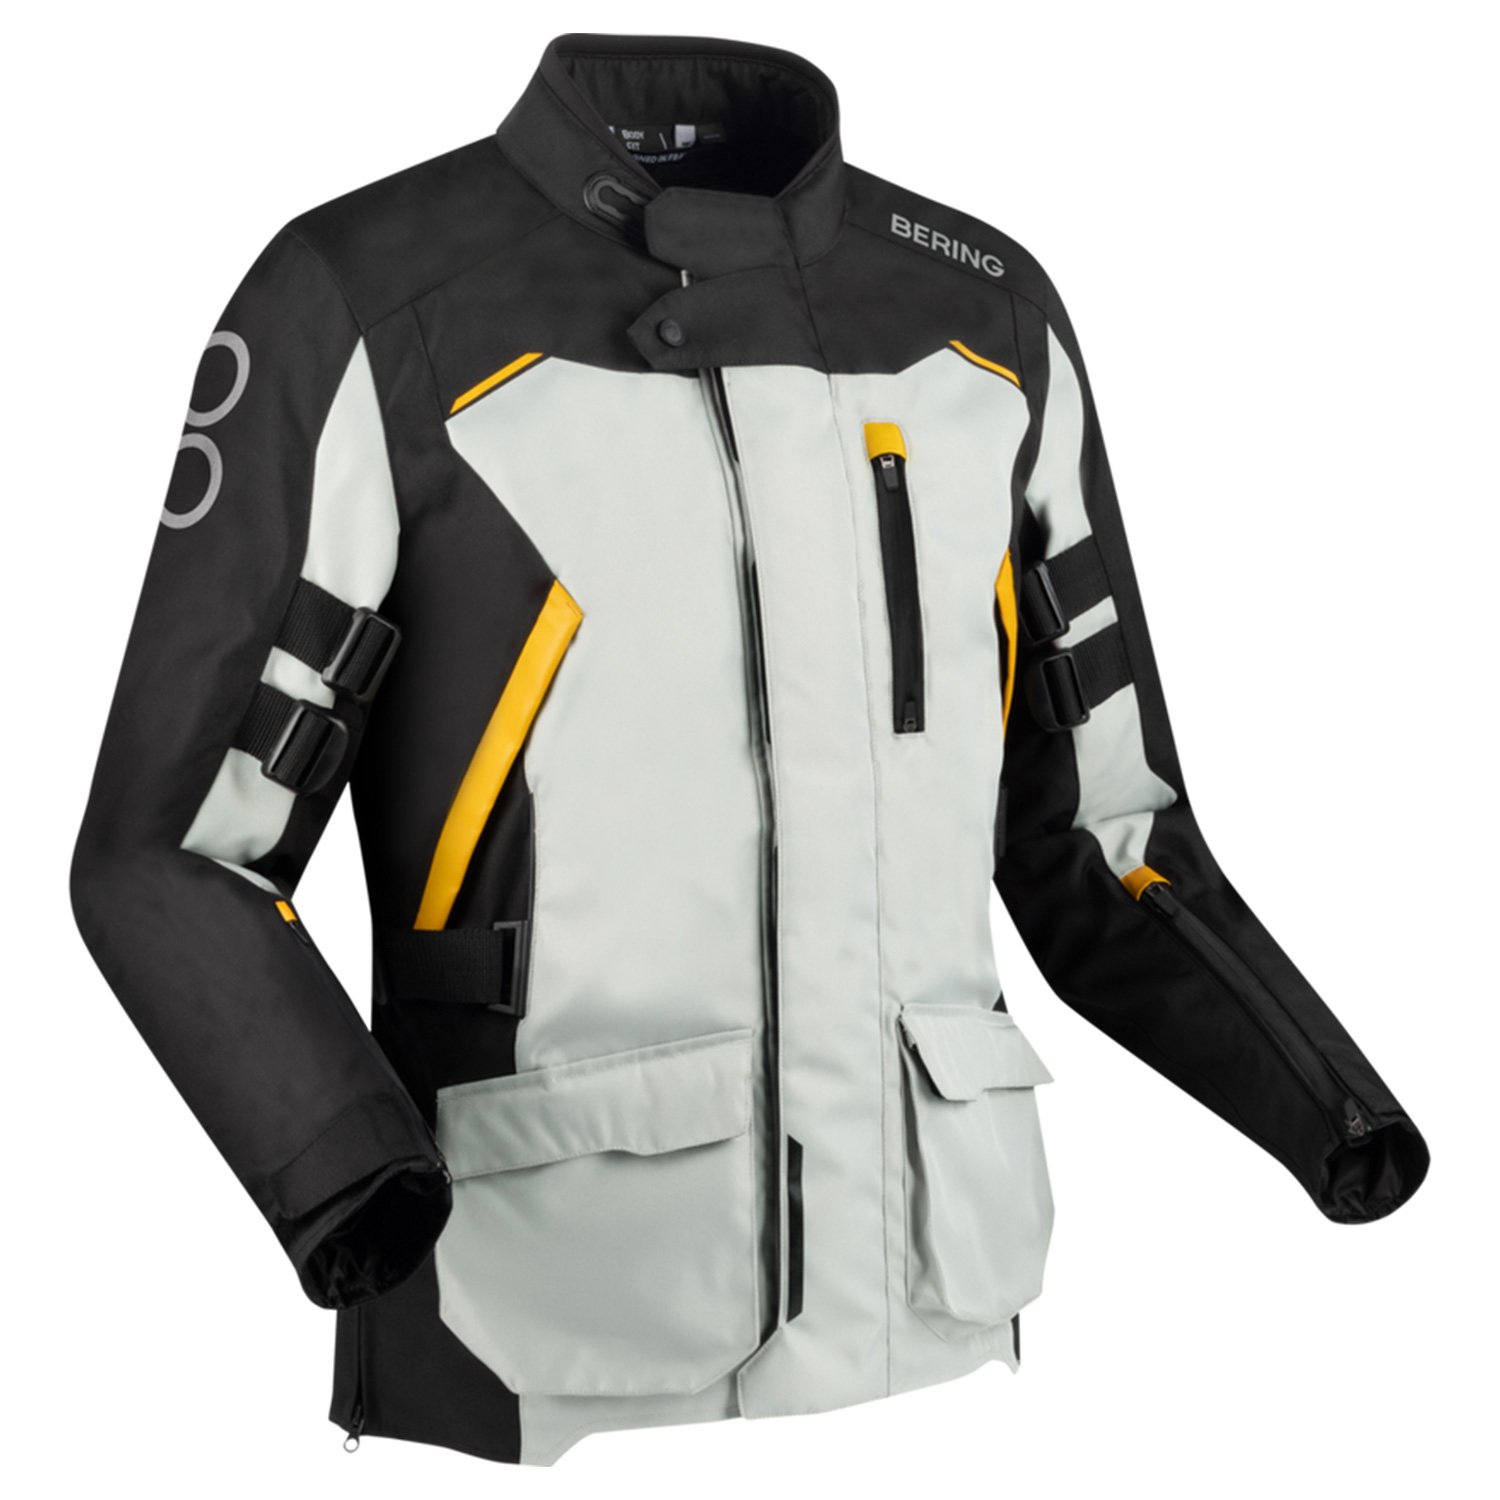 Image of Bering Zephyr Jacket Black Grey Yellow Taille 2XL